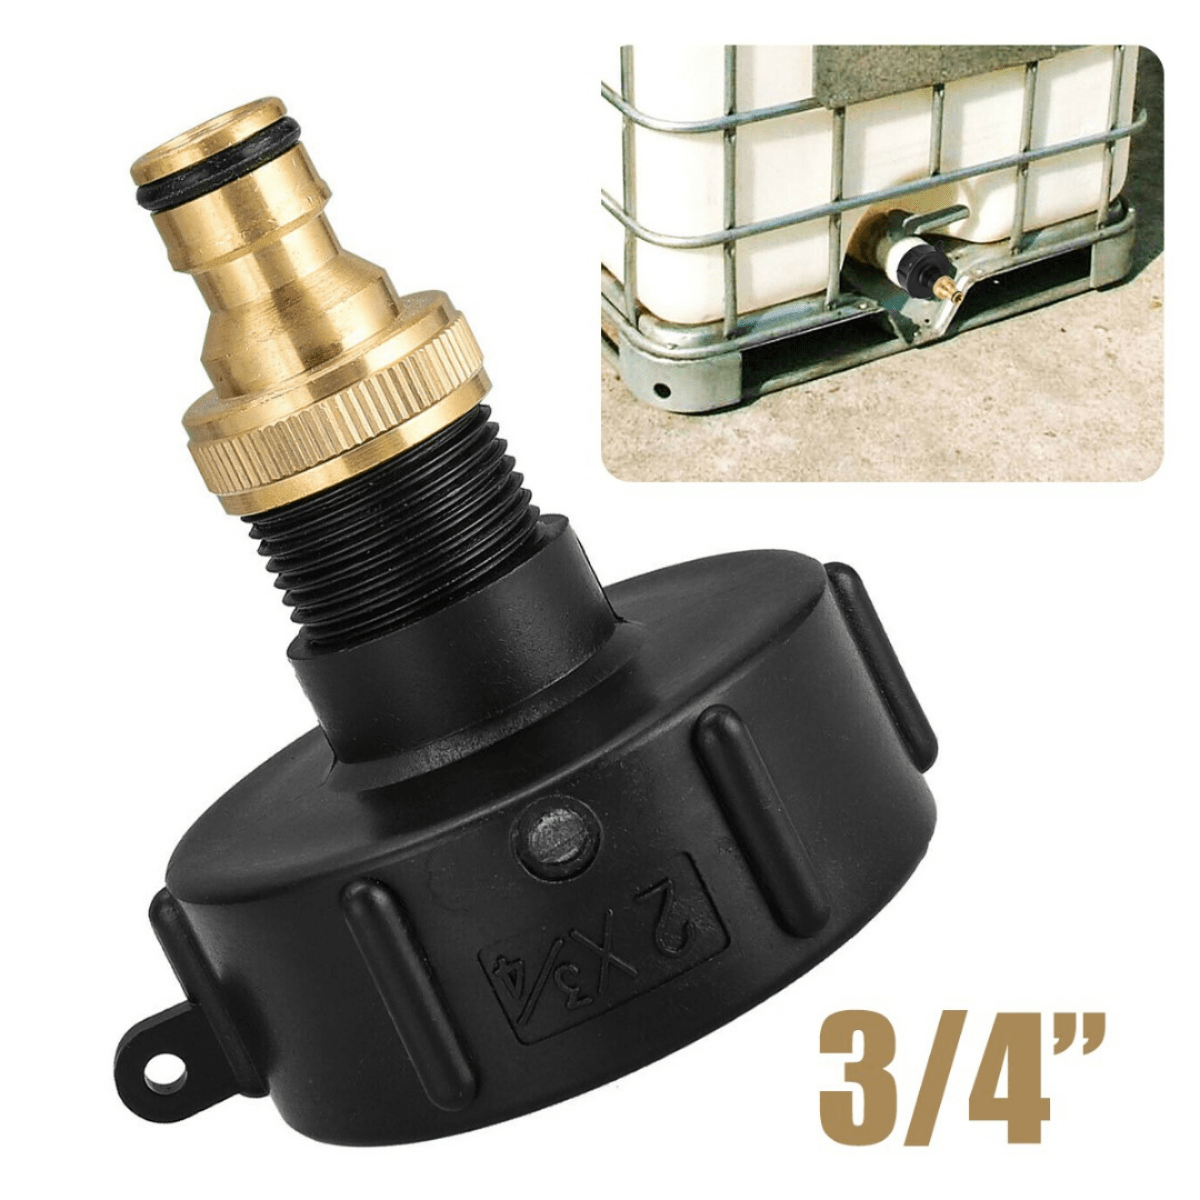 

1 Set, Adapter With 3/4 Connector S60x6 Ig For Ibc Water Tank Rain Barrel 1000l, Plants Water System With Adjustable Control Valve Switch, Watering Sprinkler Nozzle, Gardening & Lawn Supplies